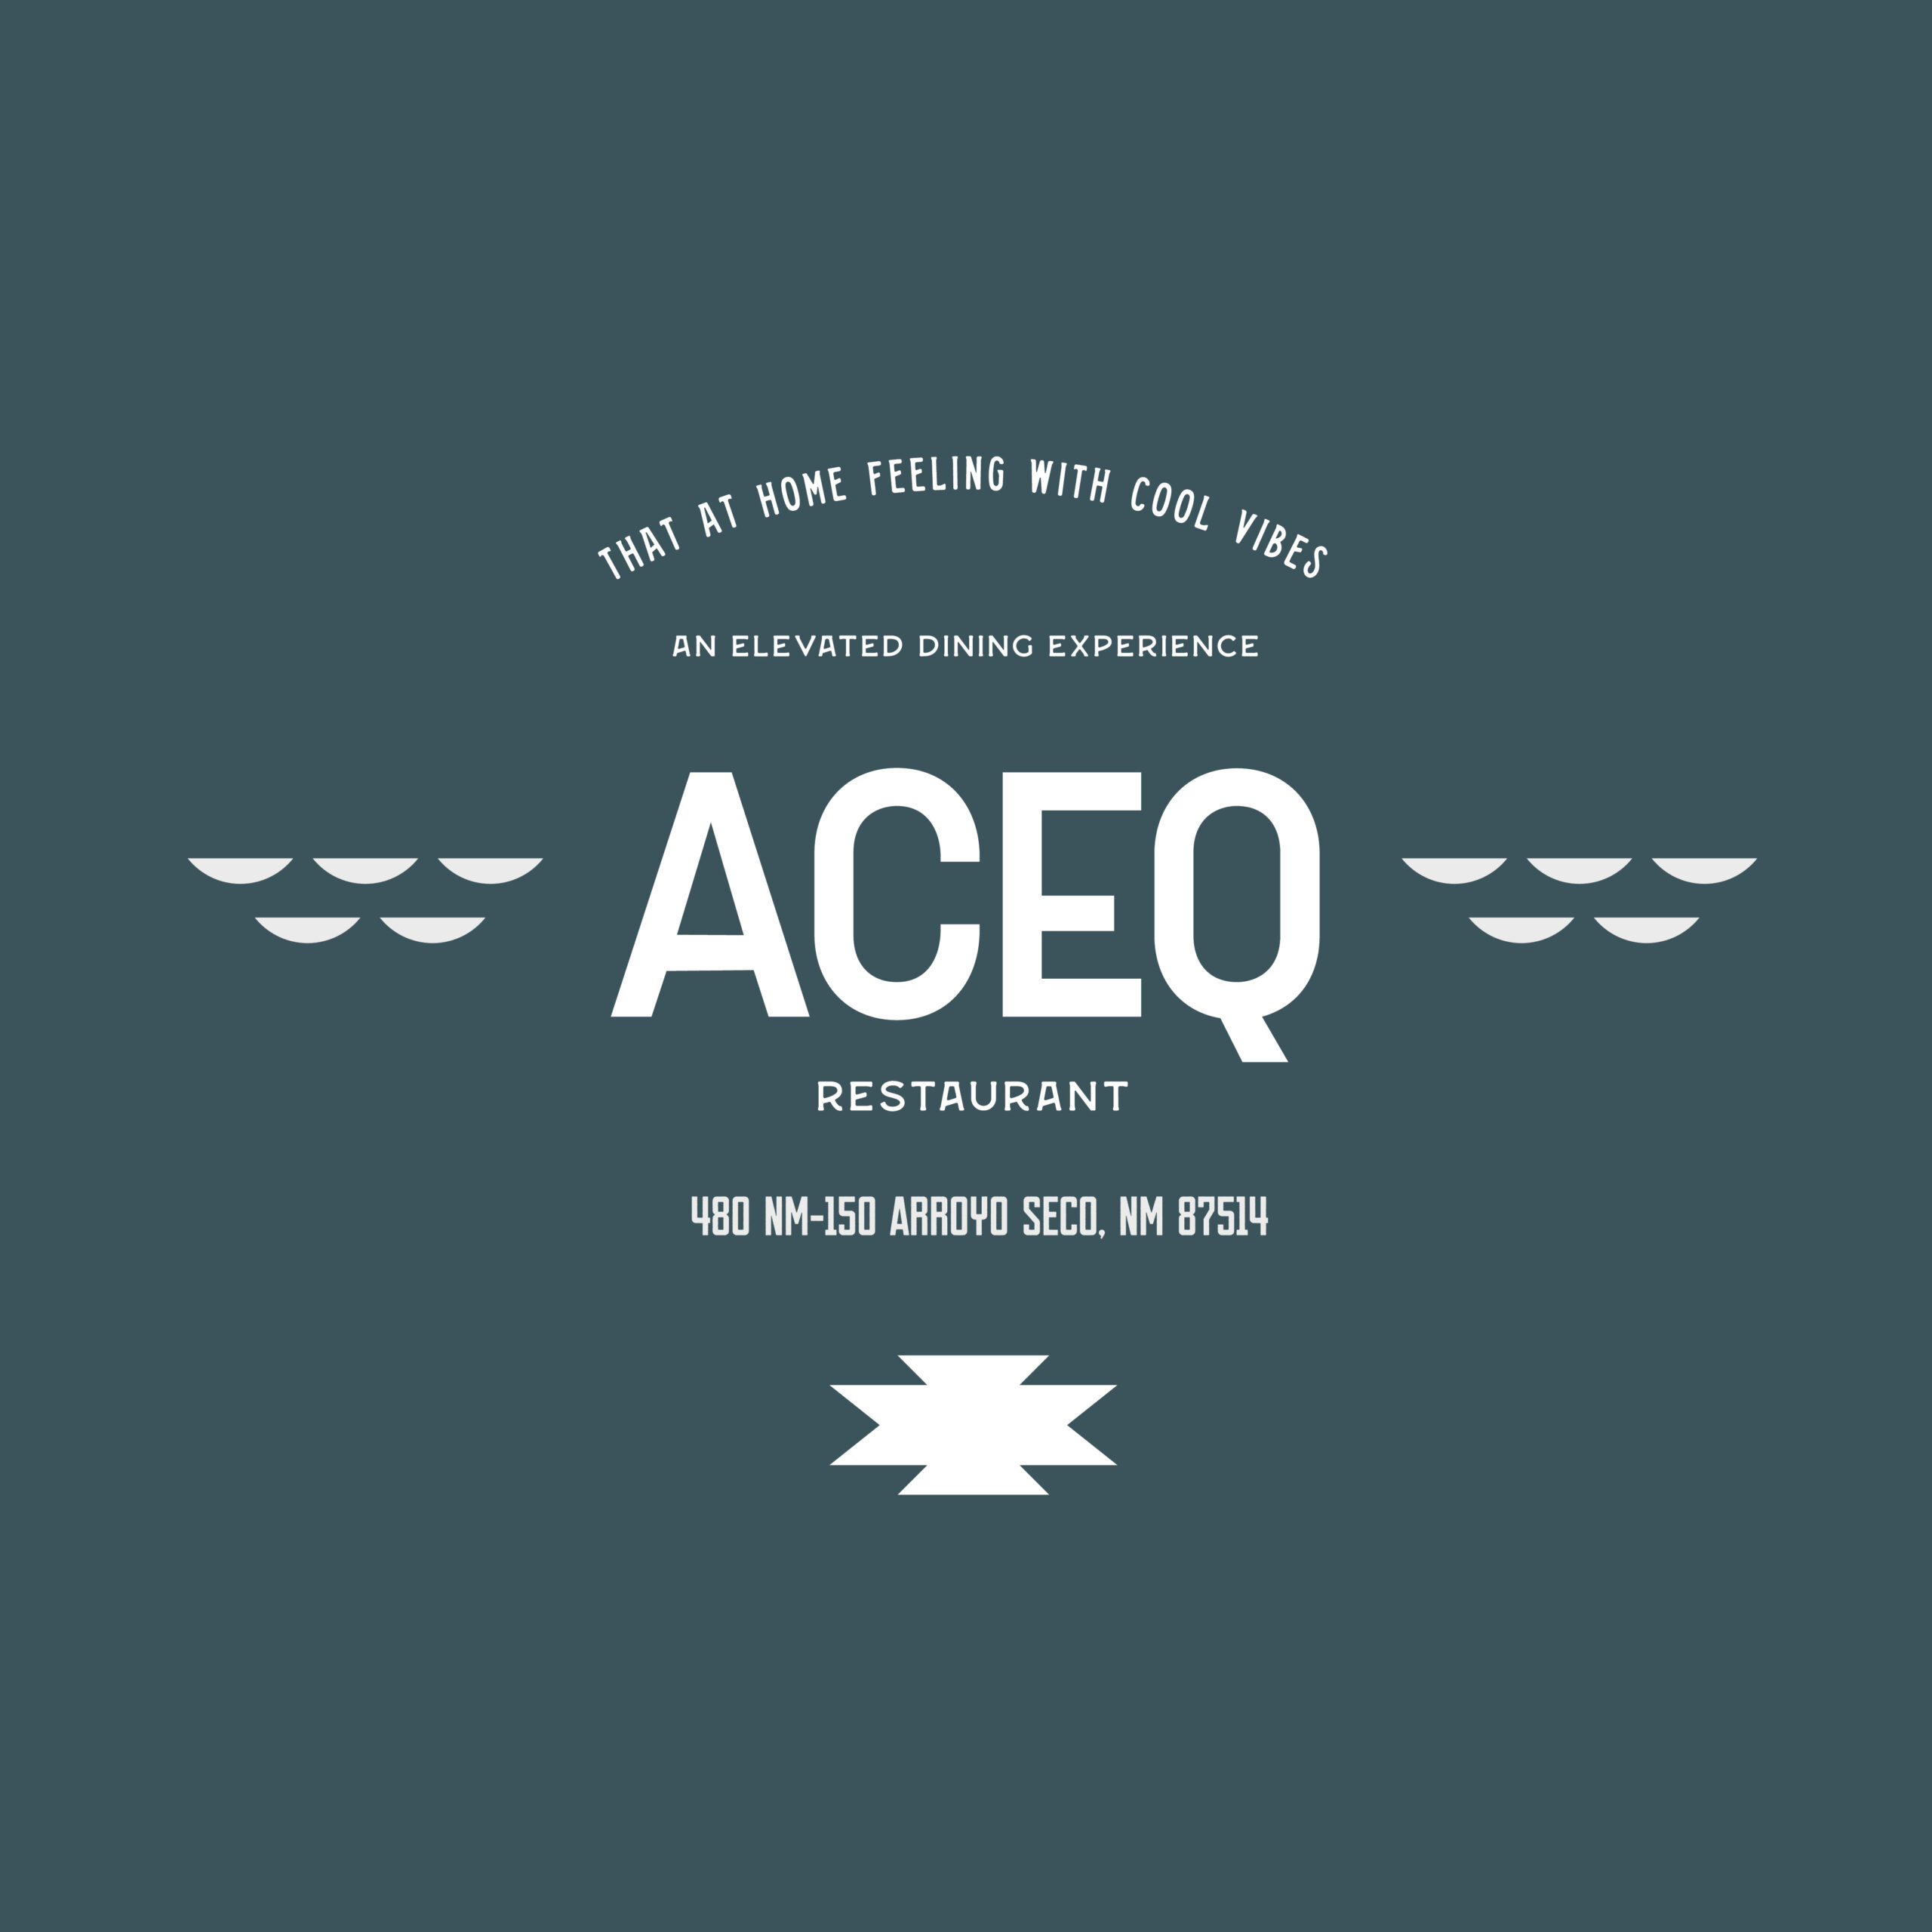 ACEQ Restaurant in Taos New Mexico Logo Design By Stellen Design Branding and Logo Design Agency in Los Angeles CA